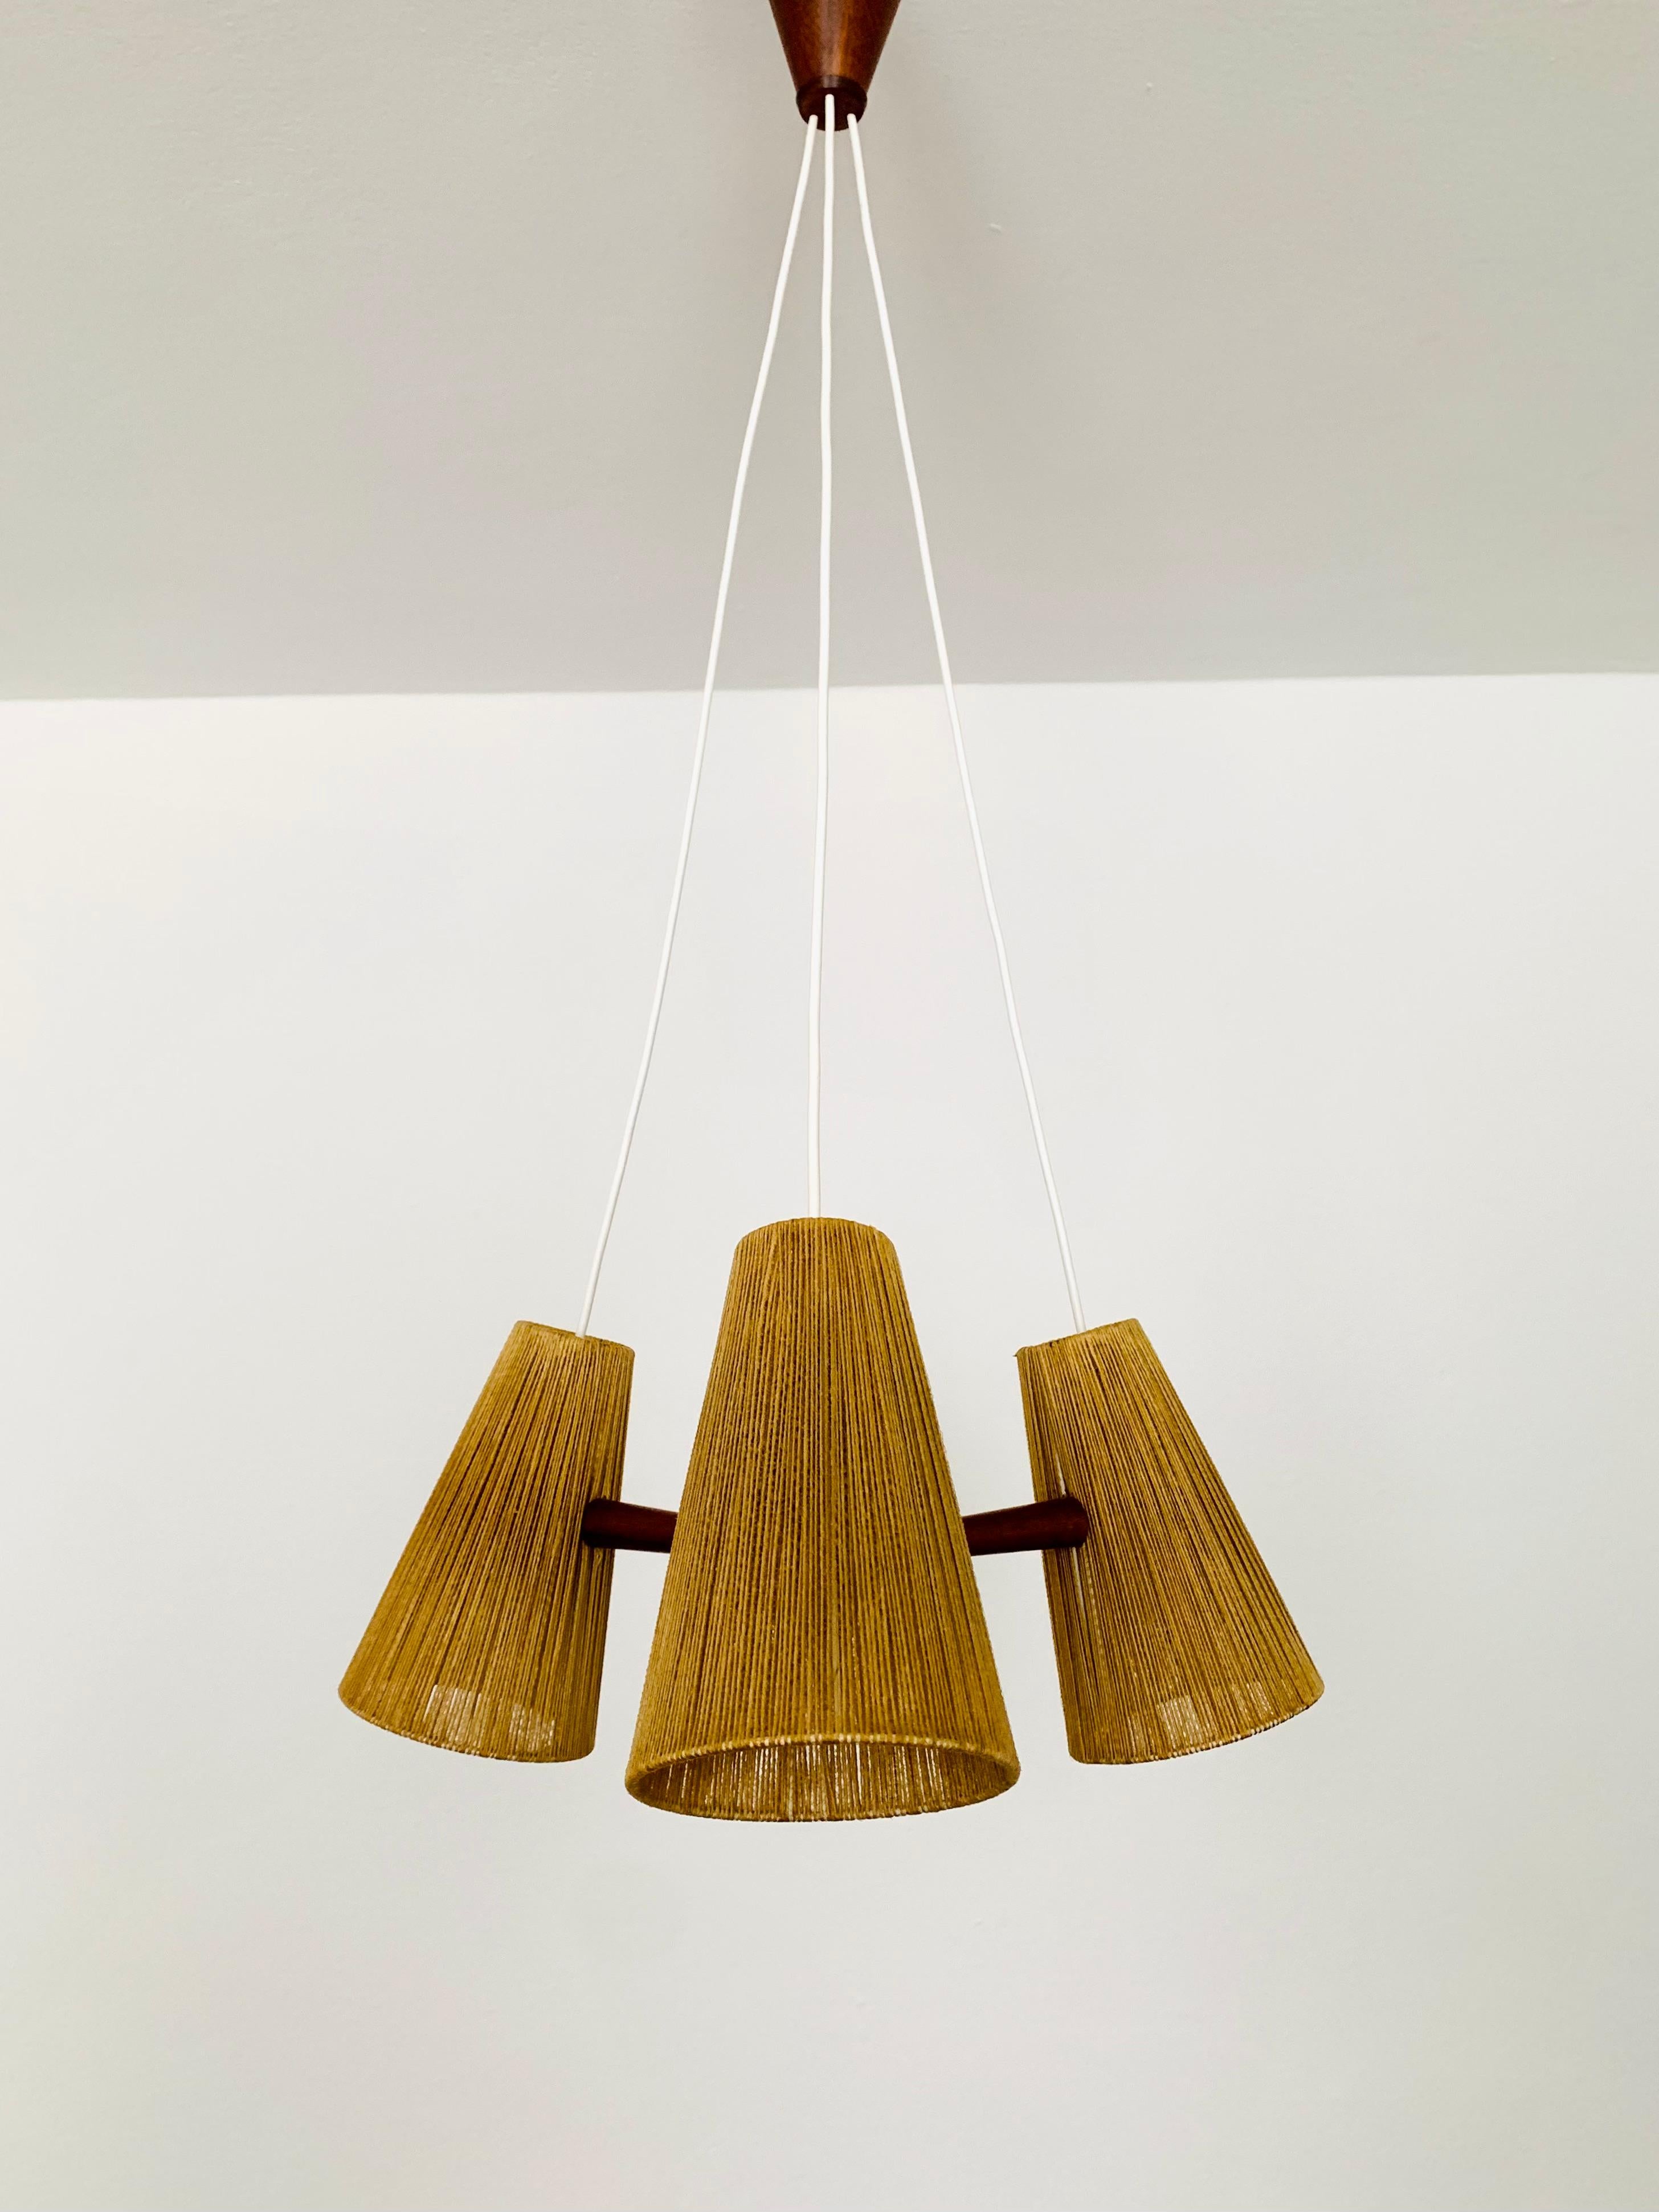 Beautiful raffia lamp from the 1960s.
Great and unusual design with a fantastically comfortable look.
Very nice teak details and high-quality workmanship.
A spectacular play of light is created.

Manufacturer: Temde

Condition:

Very good